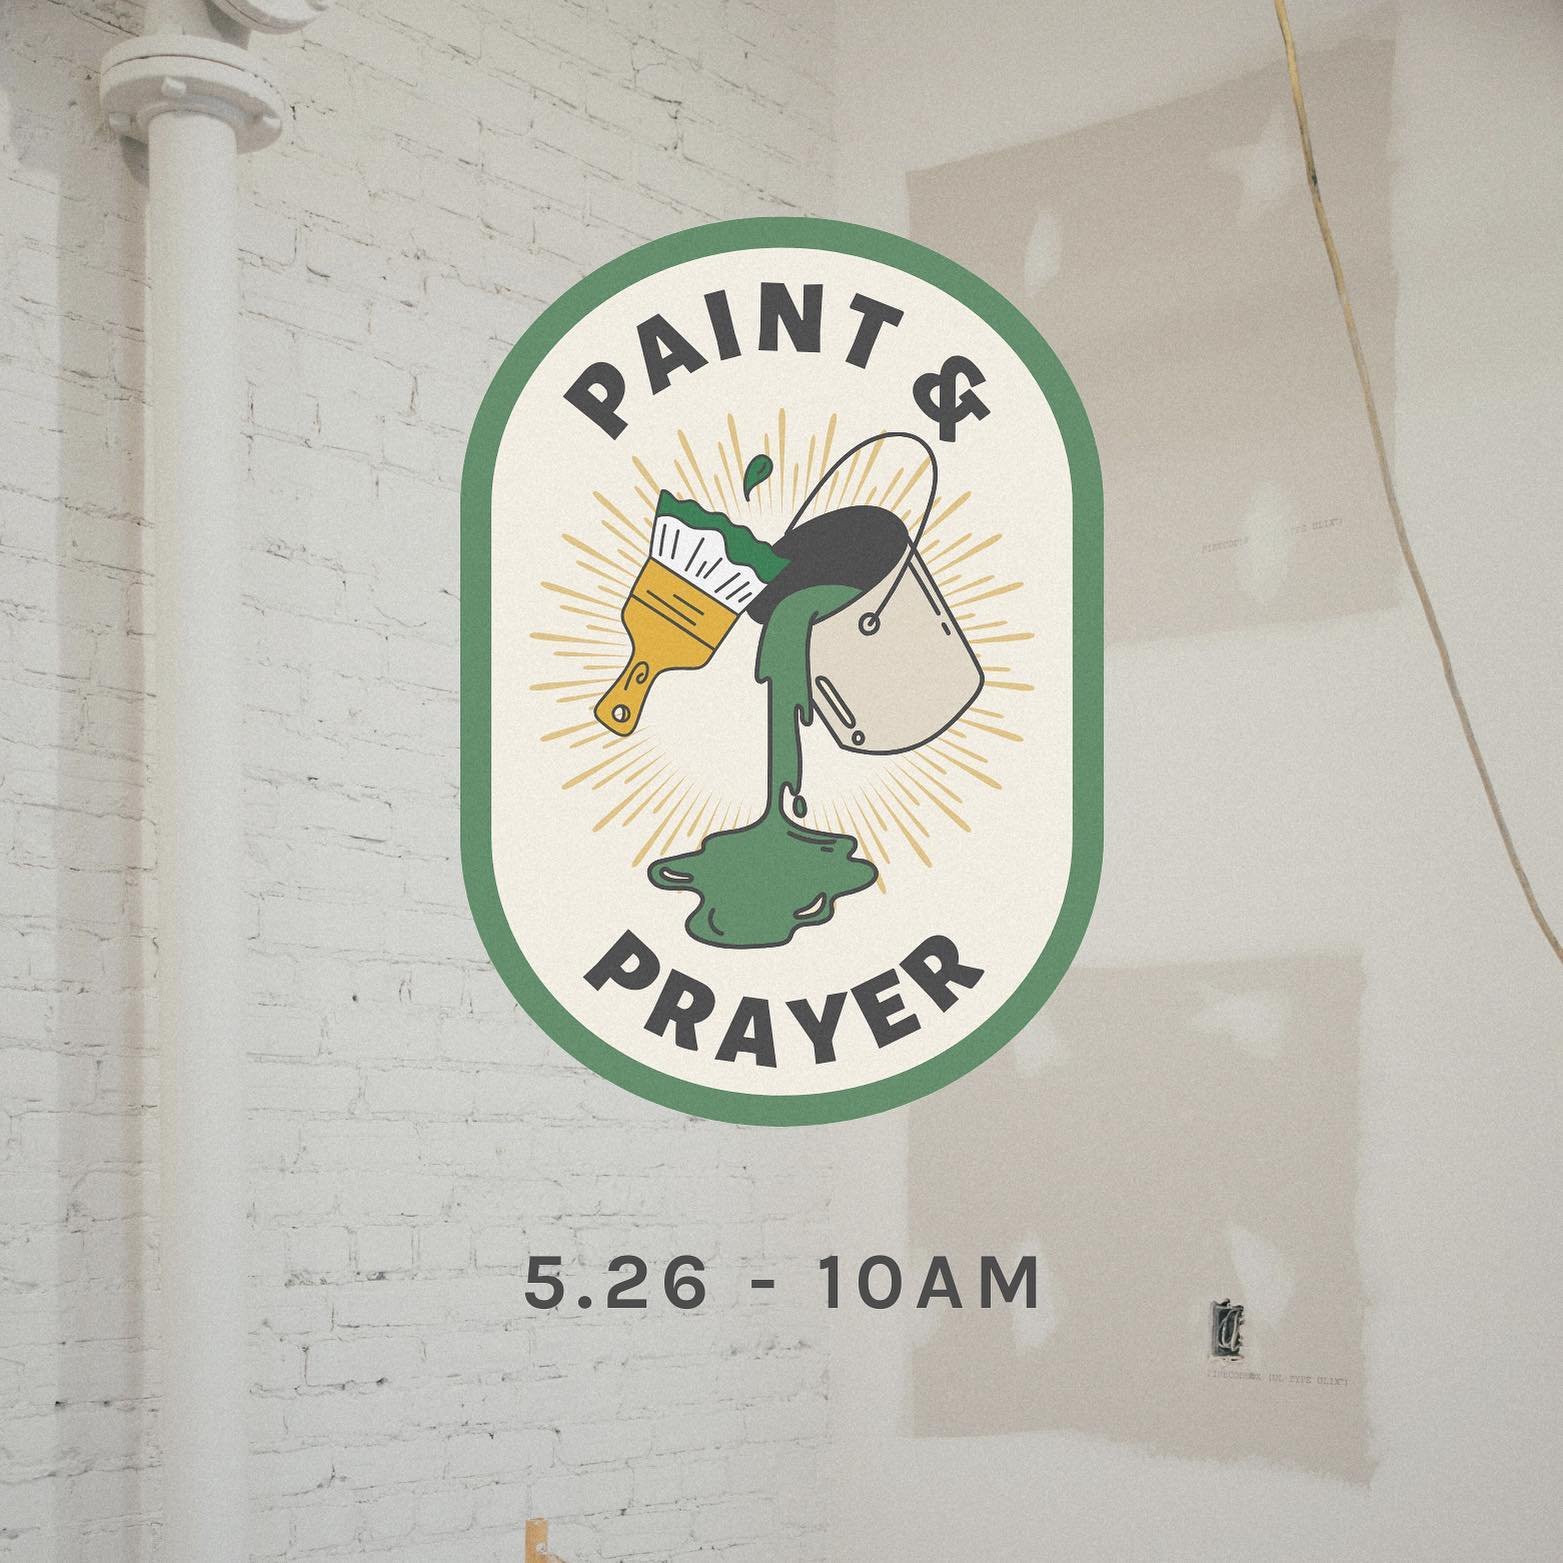 Sunday, May 26th, we&rsquo;re switching things up! Instead of our usual gathering, we&rsquo;ll meet at our new building for a day of prayer, worship, and painting the downstairs. It&rsquo;s a great chance to see the amazing new space and get creative